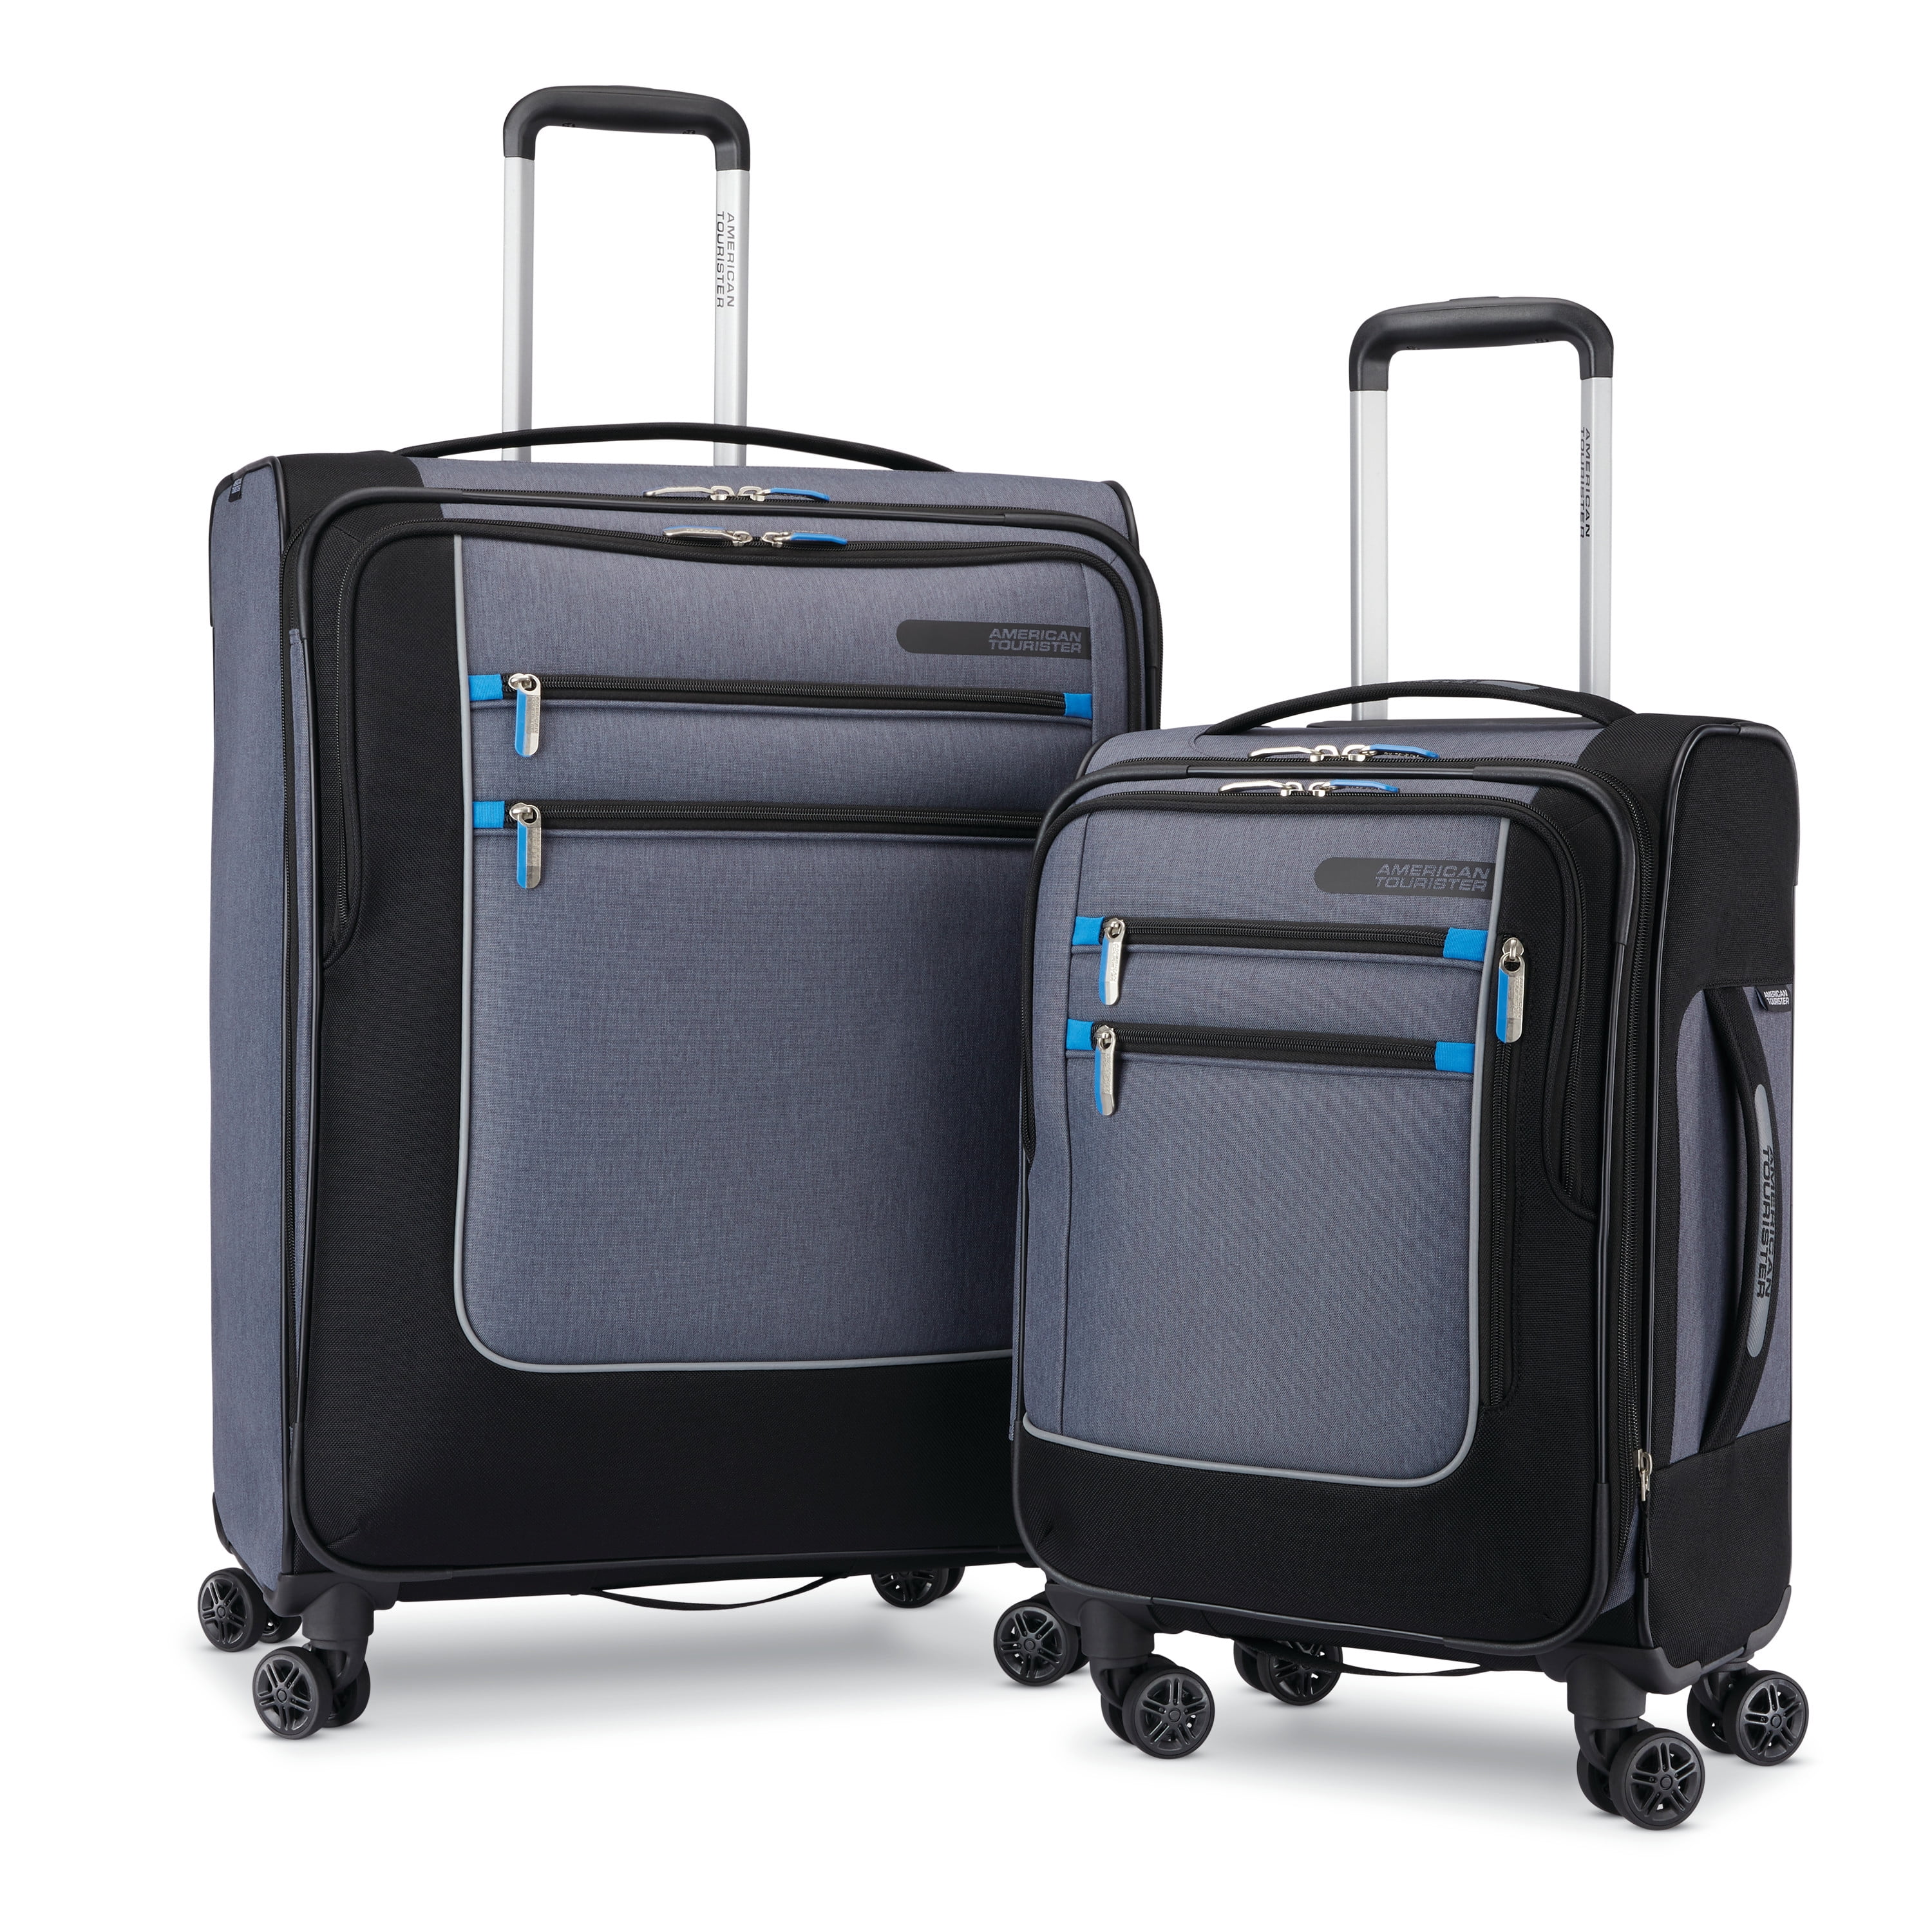 American Tourister Stack-It 3 Piece Set - Black - from American Tourister